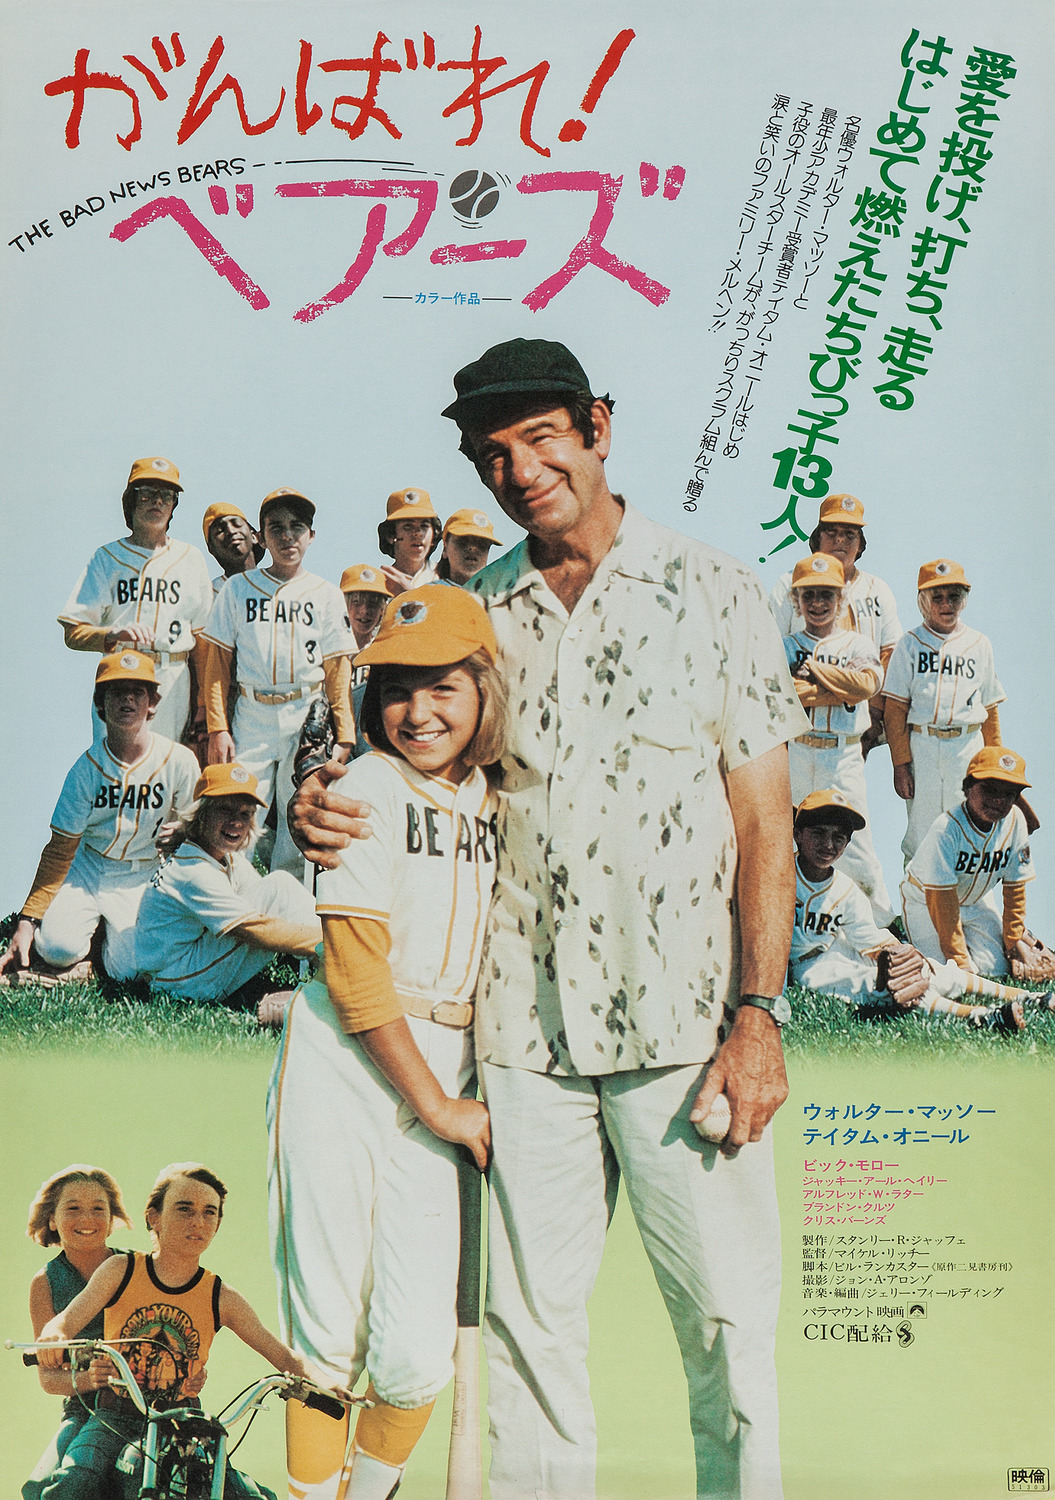 Extra Large Movie Poster Image for The Bad News Bears (#3 of 3)